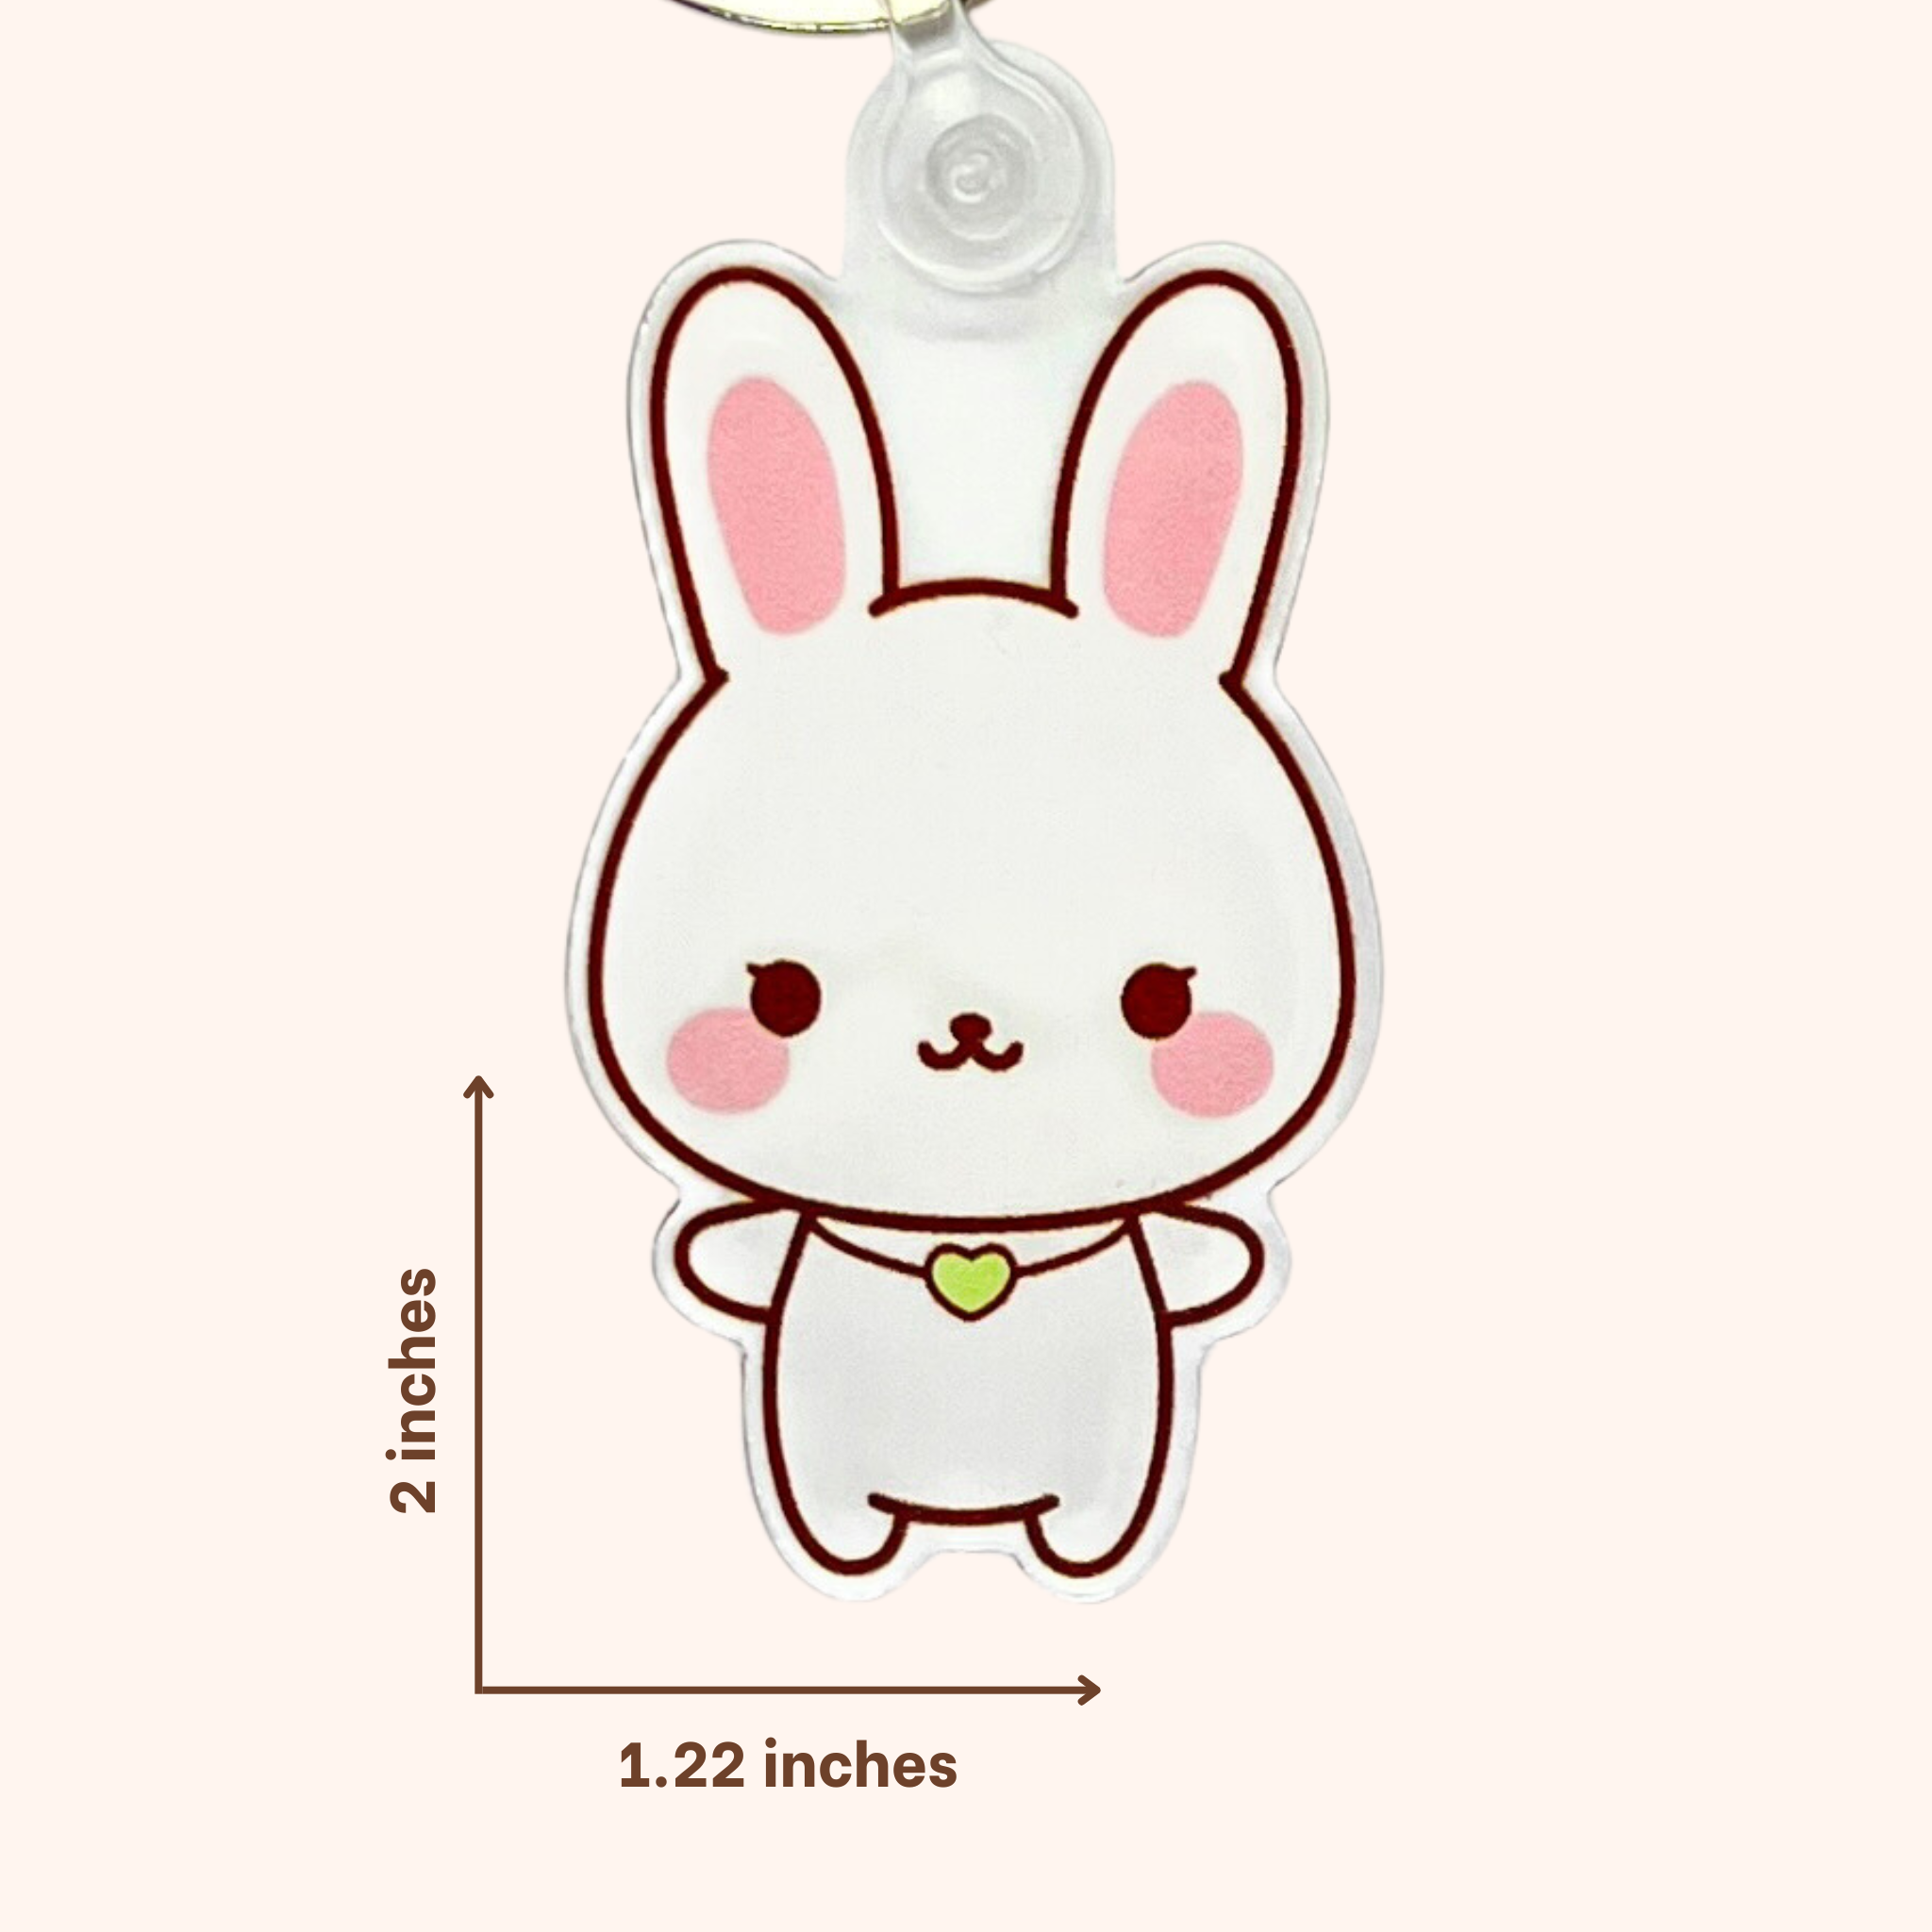 Cute Pink and Green Colored Rabbit Keychain 